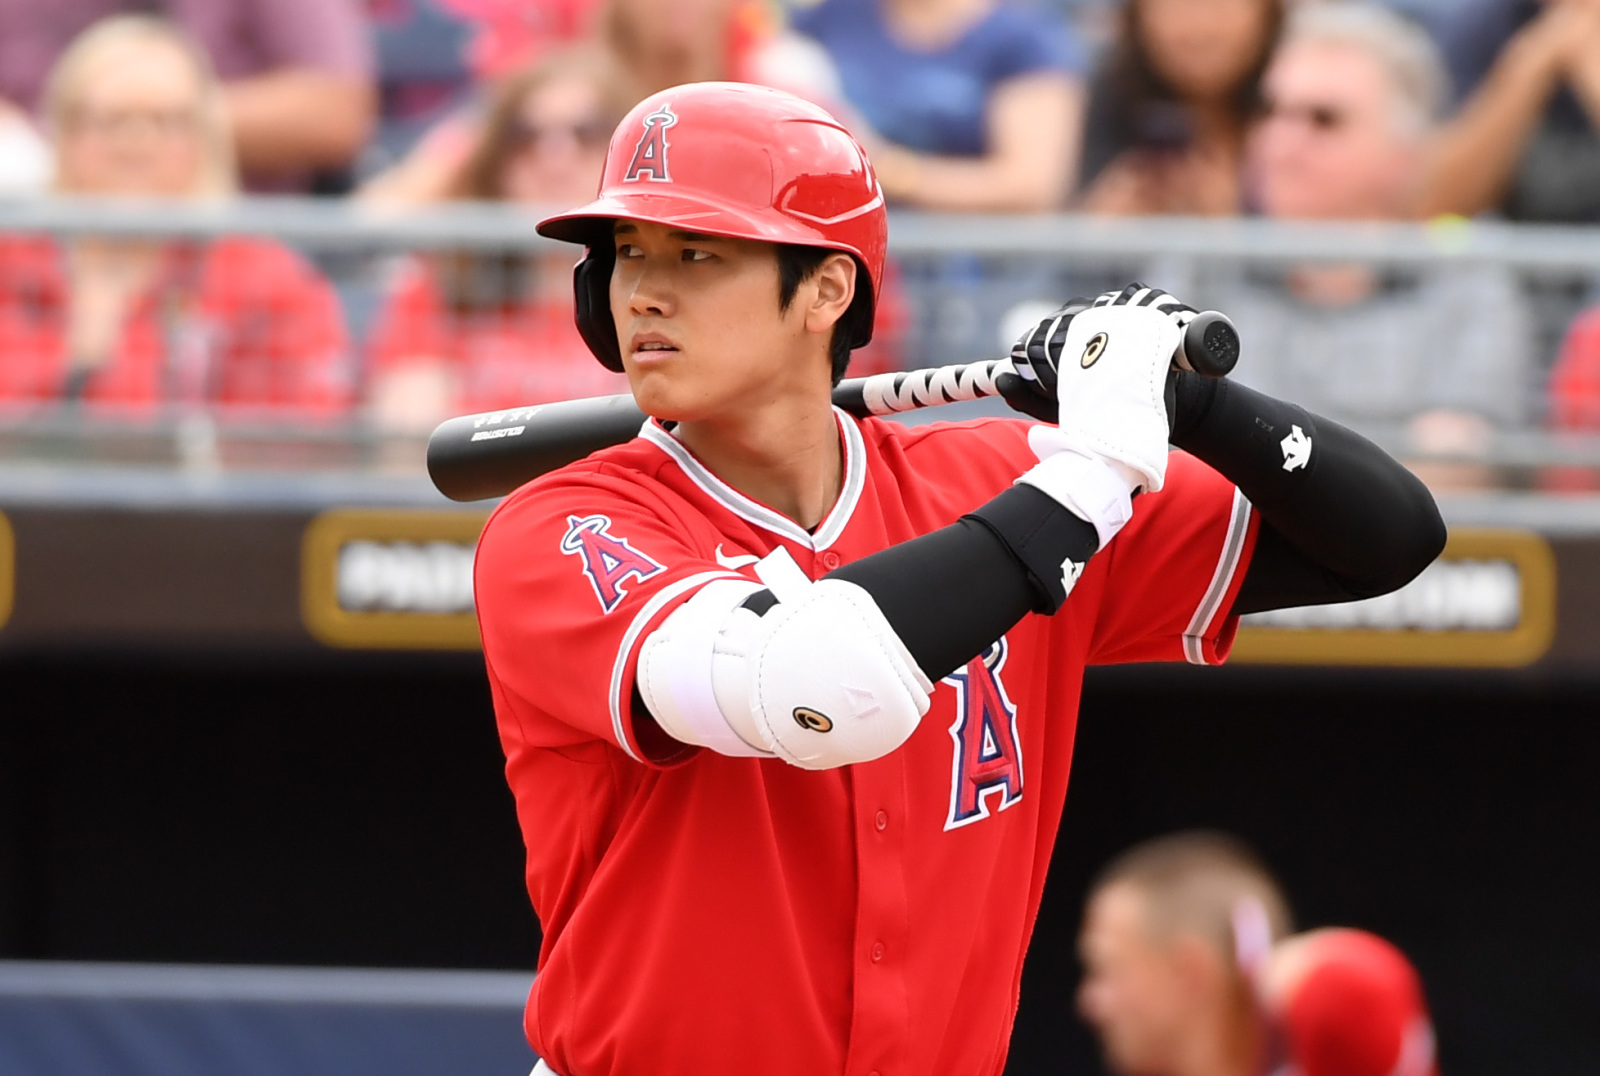 Los Angeles Angels: Shohei Ohtani's unique approach to offseason